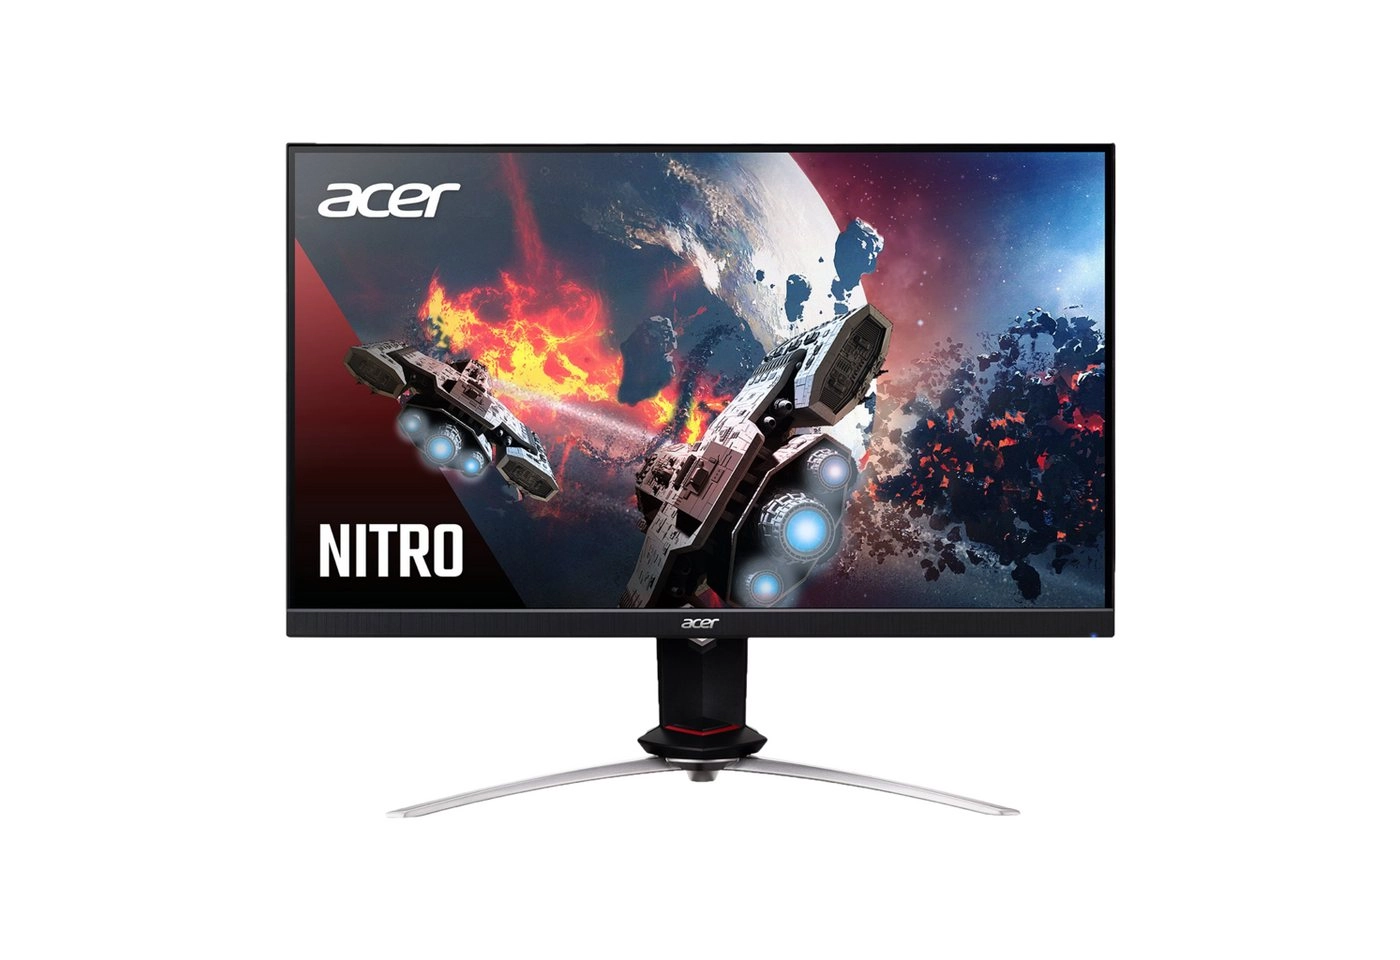 Acer Nitro XV253QPbmiiprzx | Monitor | 24,5 Zoll / 62cm | 1920 x 1080 Full HD (1080p) | 144 Hz | LED-Monitor | Schnelle Frames | Mehrere Gaming-Modis